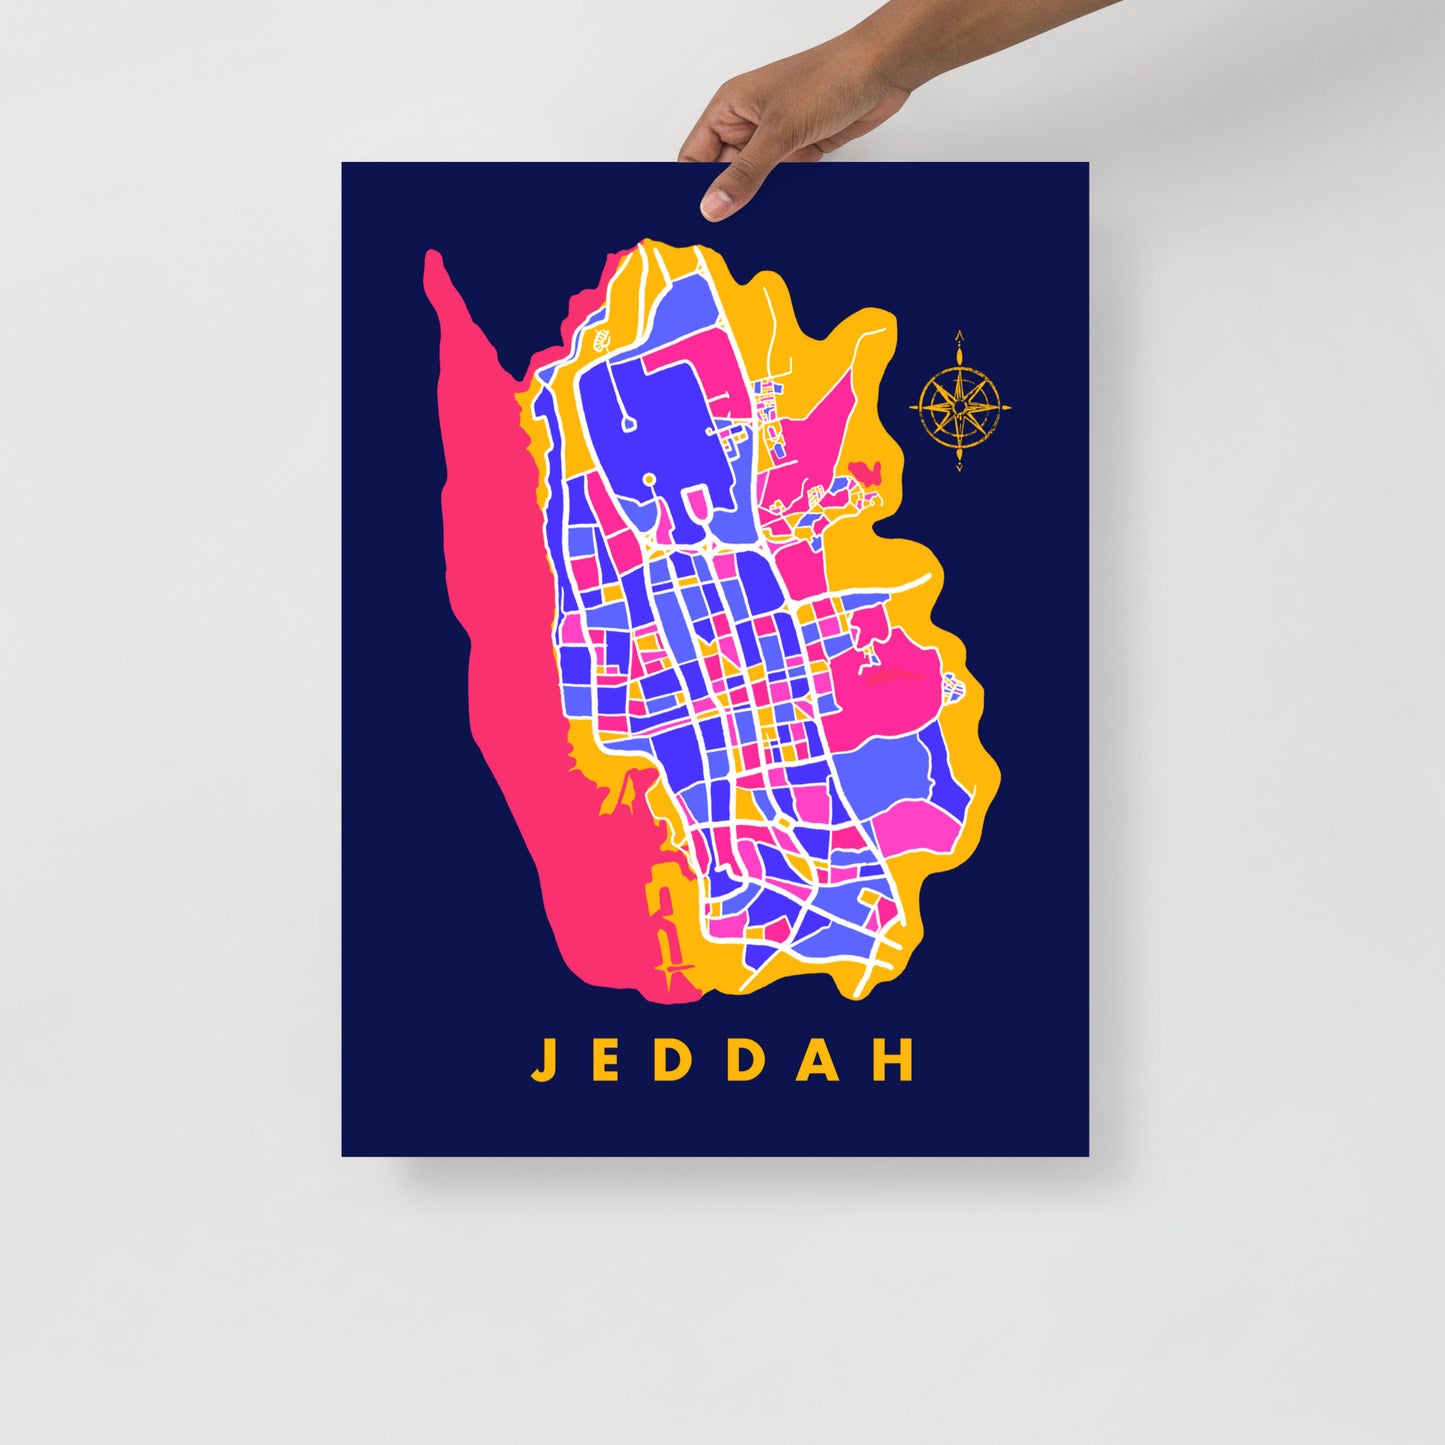 Jeddah Map Art Poster in Blue, Yellow and Pink